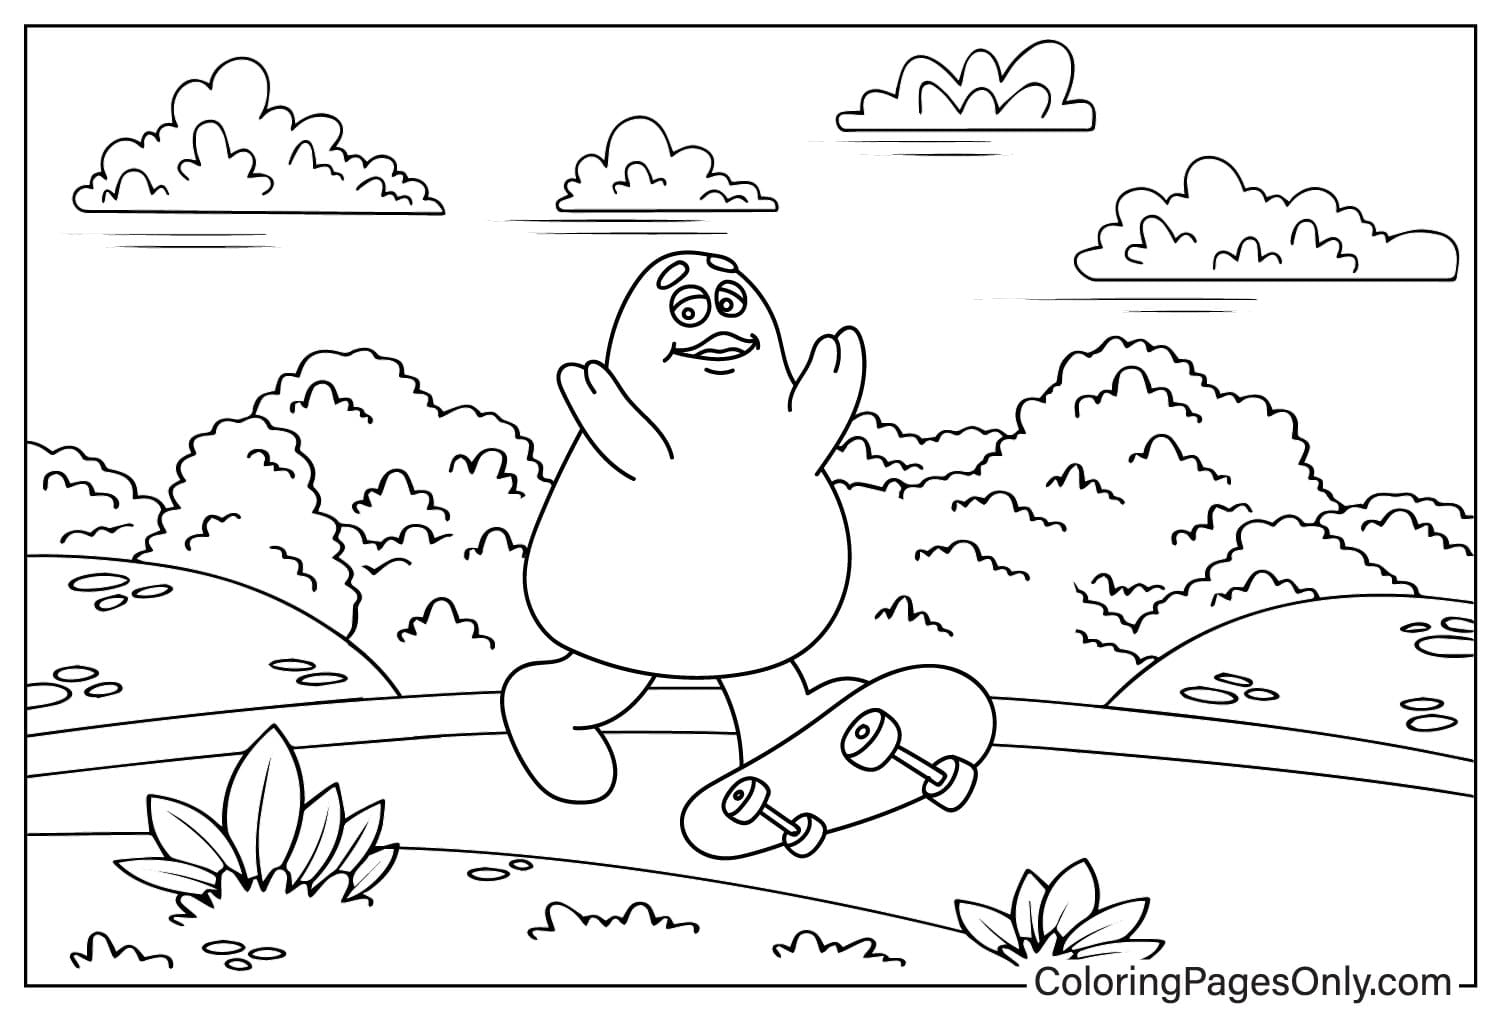 Grimace Skateboarder Playing Coloring Page from Grimace